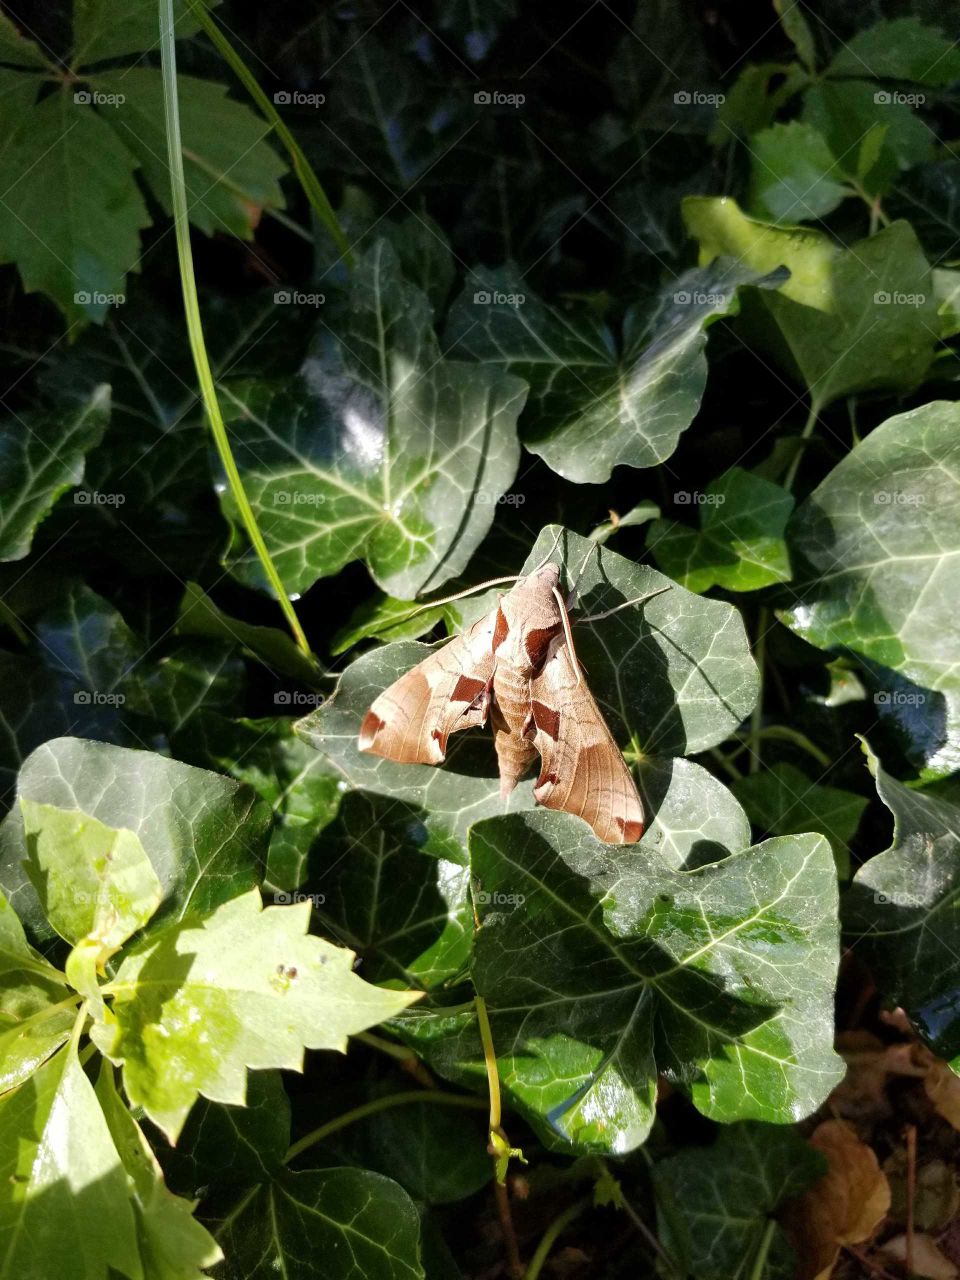 a weird looking brown mouth sitting amongst the ivy